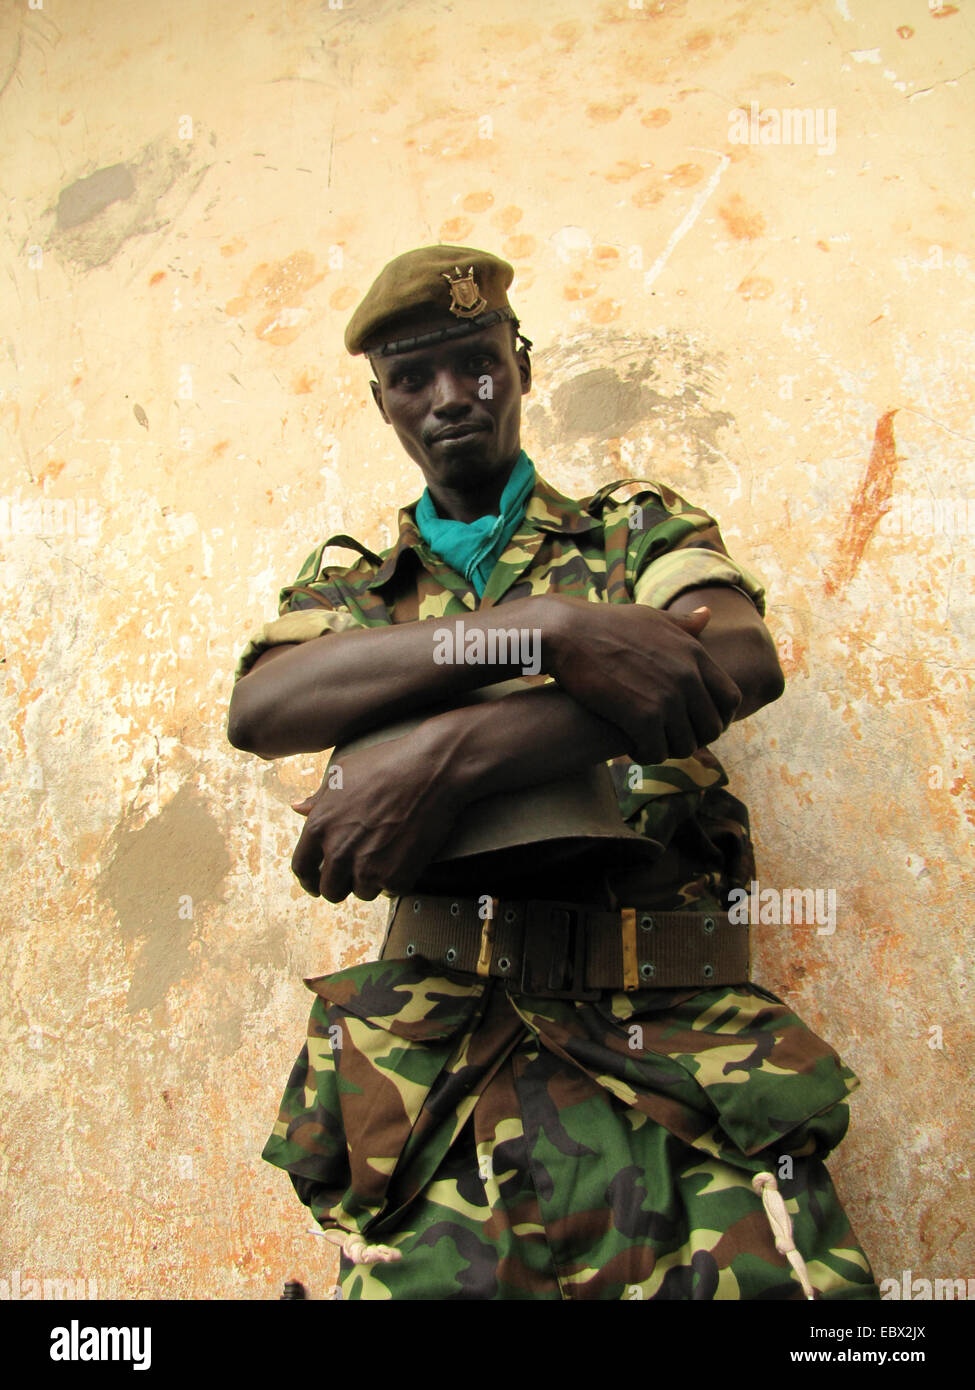 member of the guard of honour of the burundian army at the festivities for the International Day of Human Rights (10 December 2009), celebrated jointly by the Burundian government and the UN Integrated Office in Burundi, Burundi, Bujumbura rural, Kabezi Stock Photo